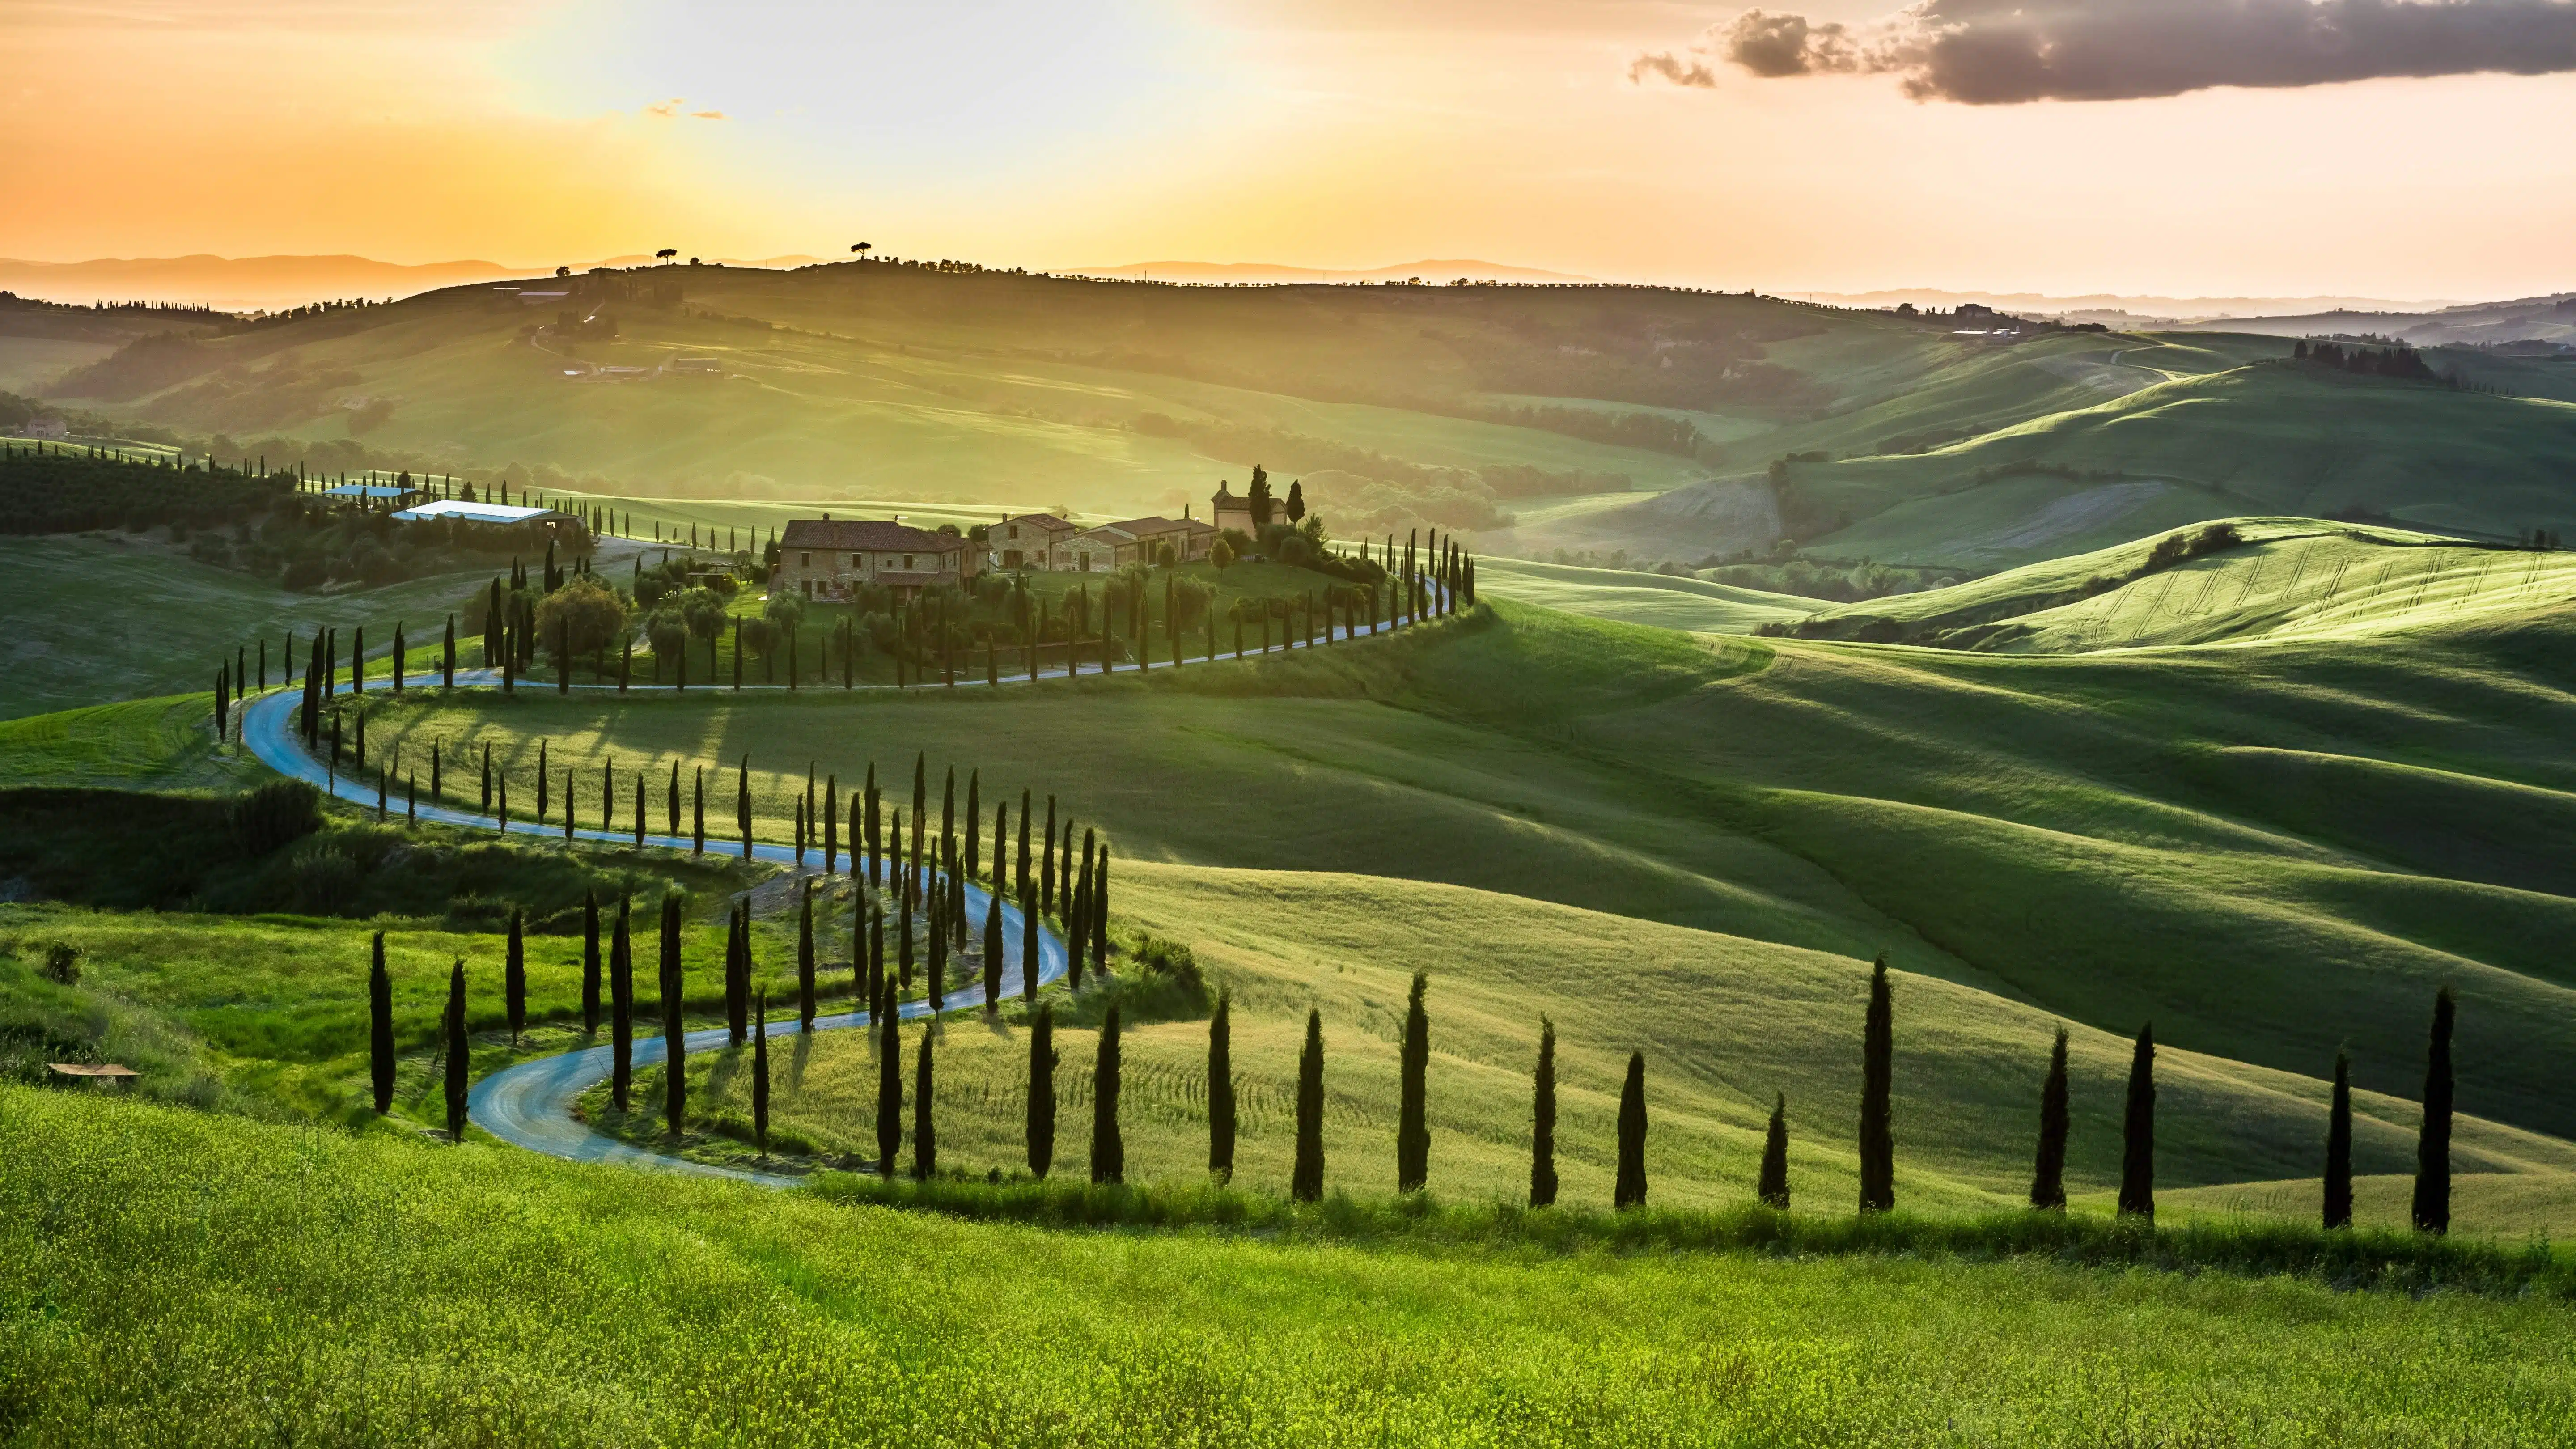 Rolling hills and cypress trees in Tuscany